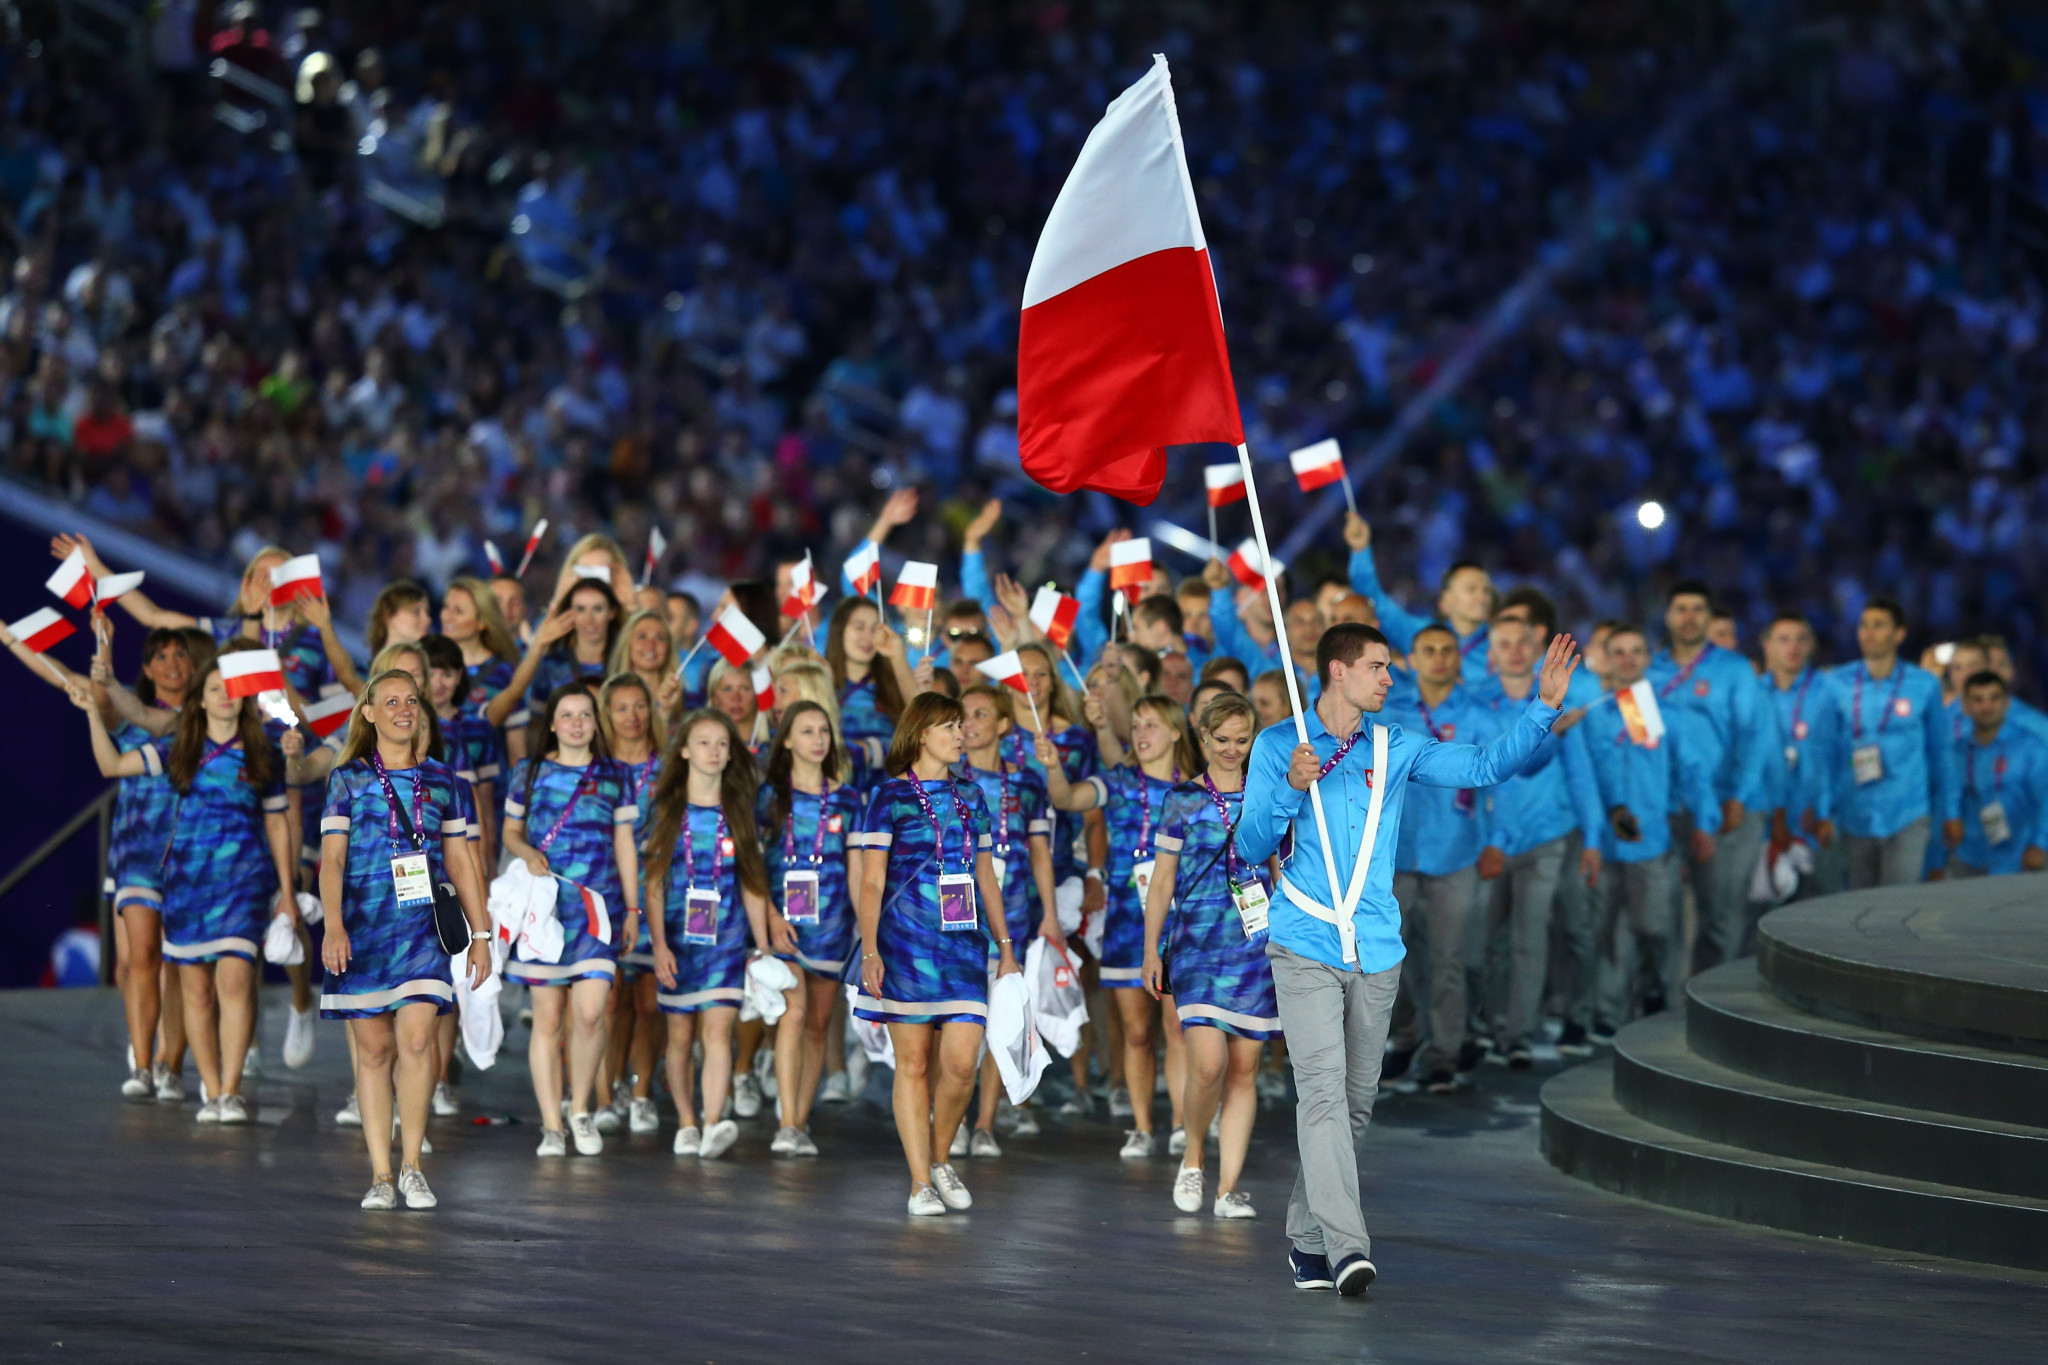 Poland is set to host the European Games next year across in Kraków and the Małopolska region as a whole ©Getty Images